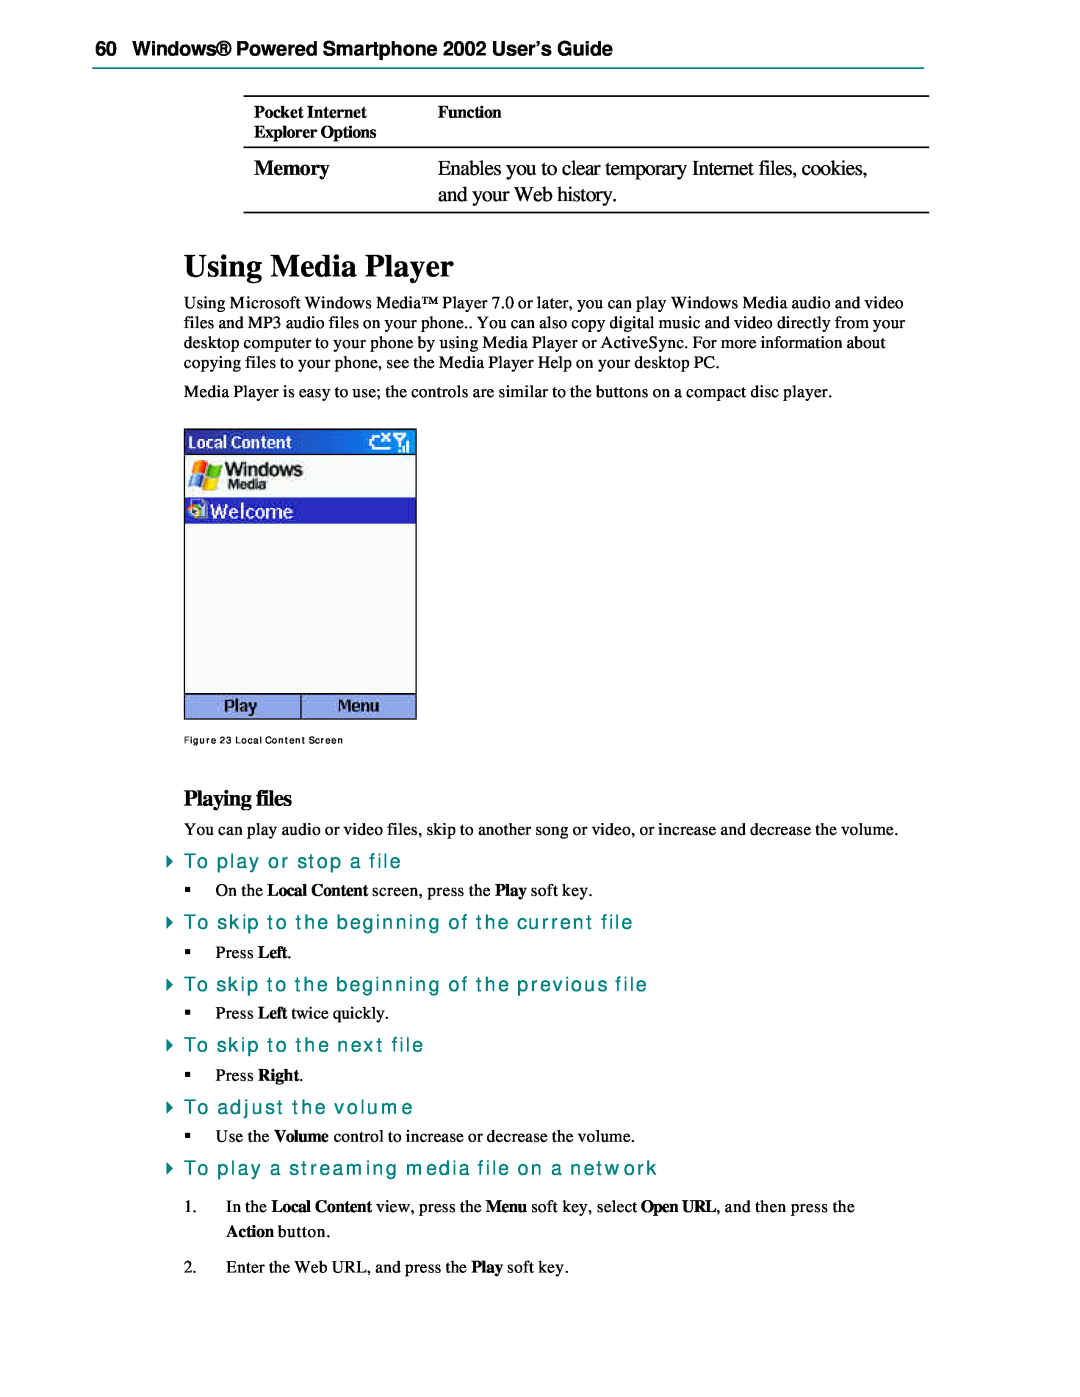 Microsoft manual Using Media Player, Playing files, Windows Powered Smartphone 2002 User’s Guide, To play or stop a file 